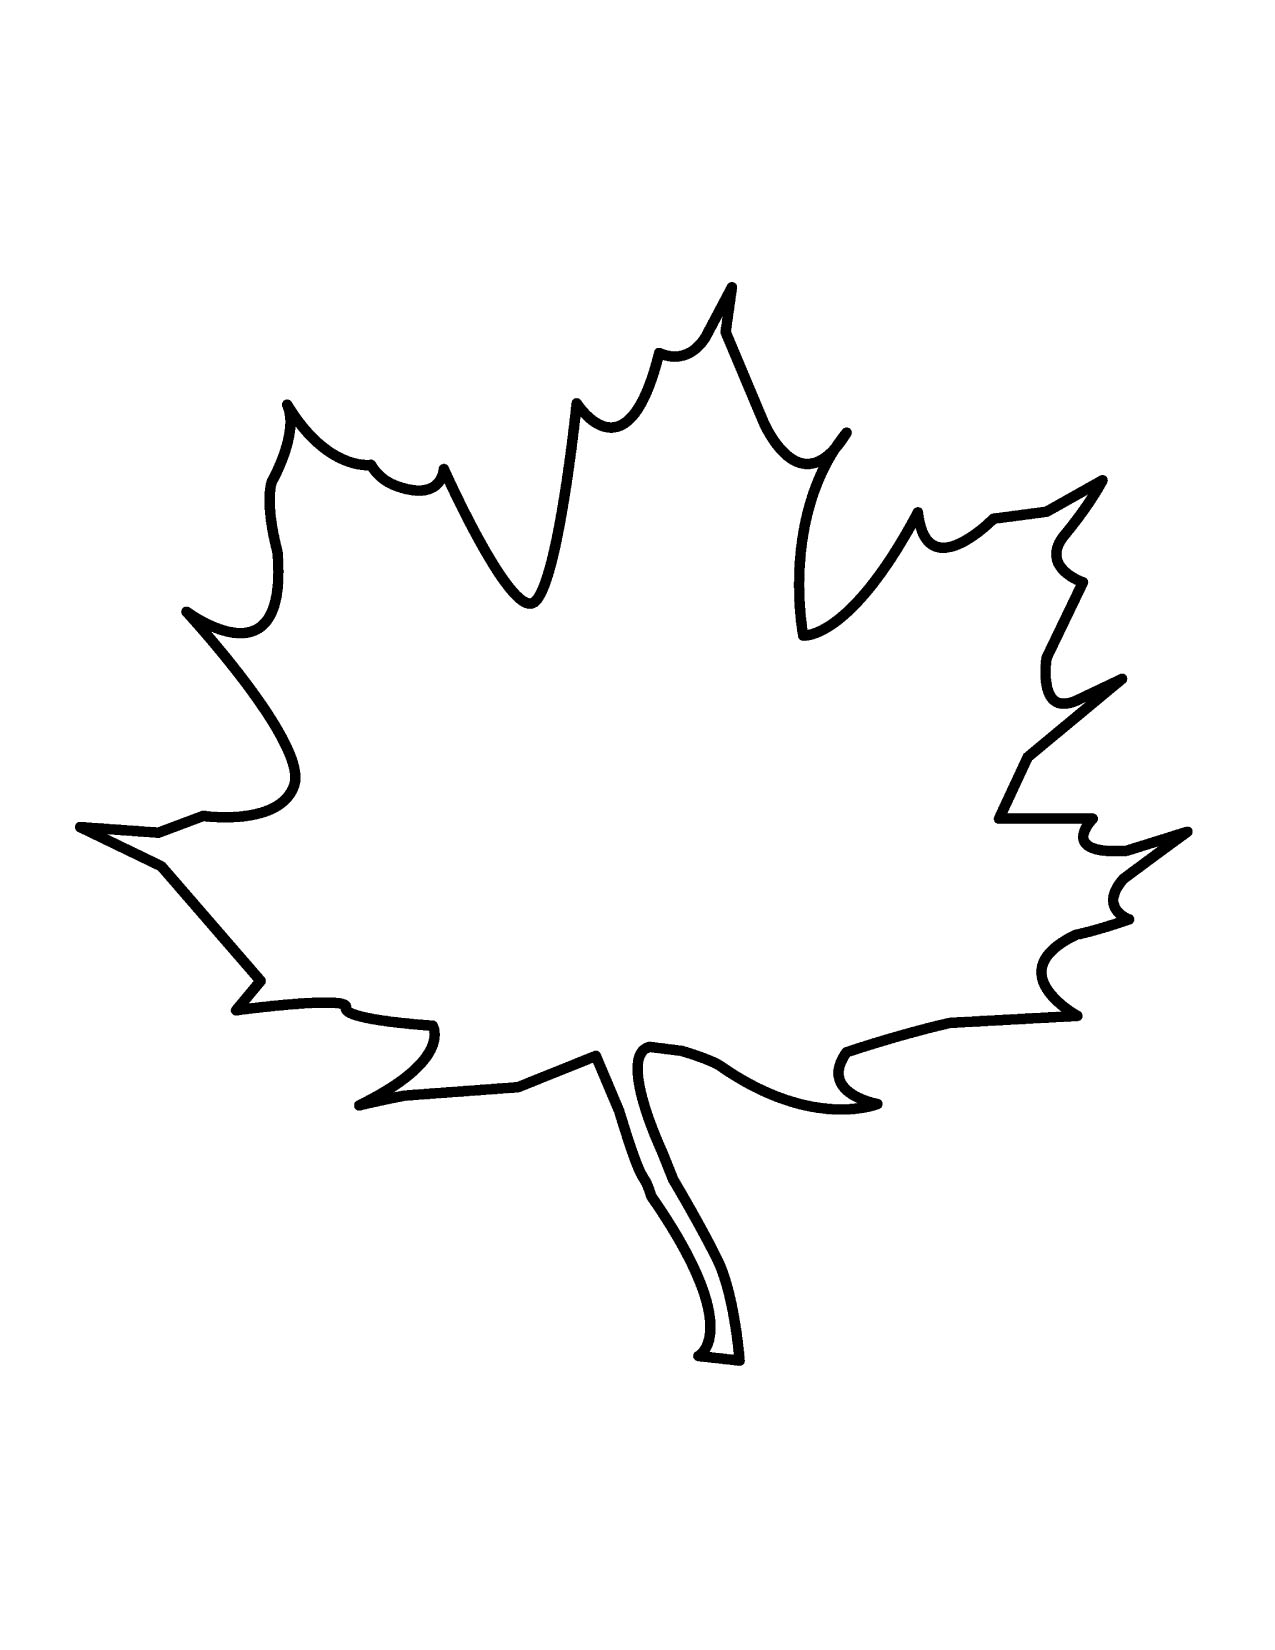 Leaf template clipart